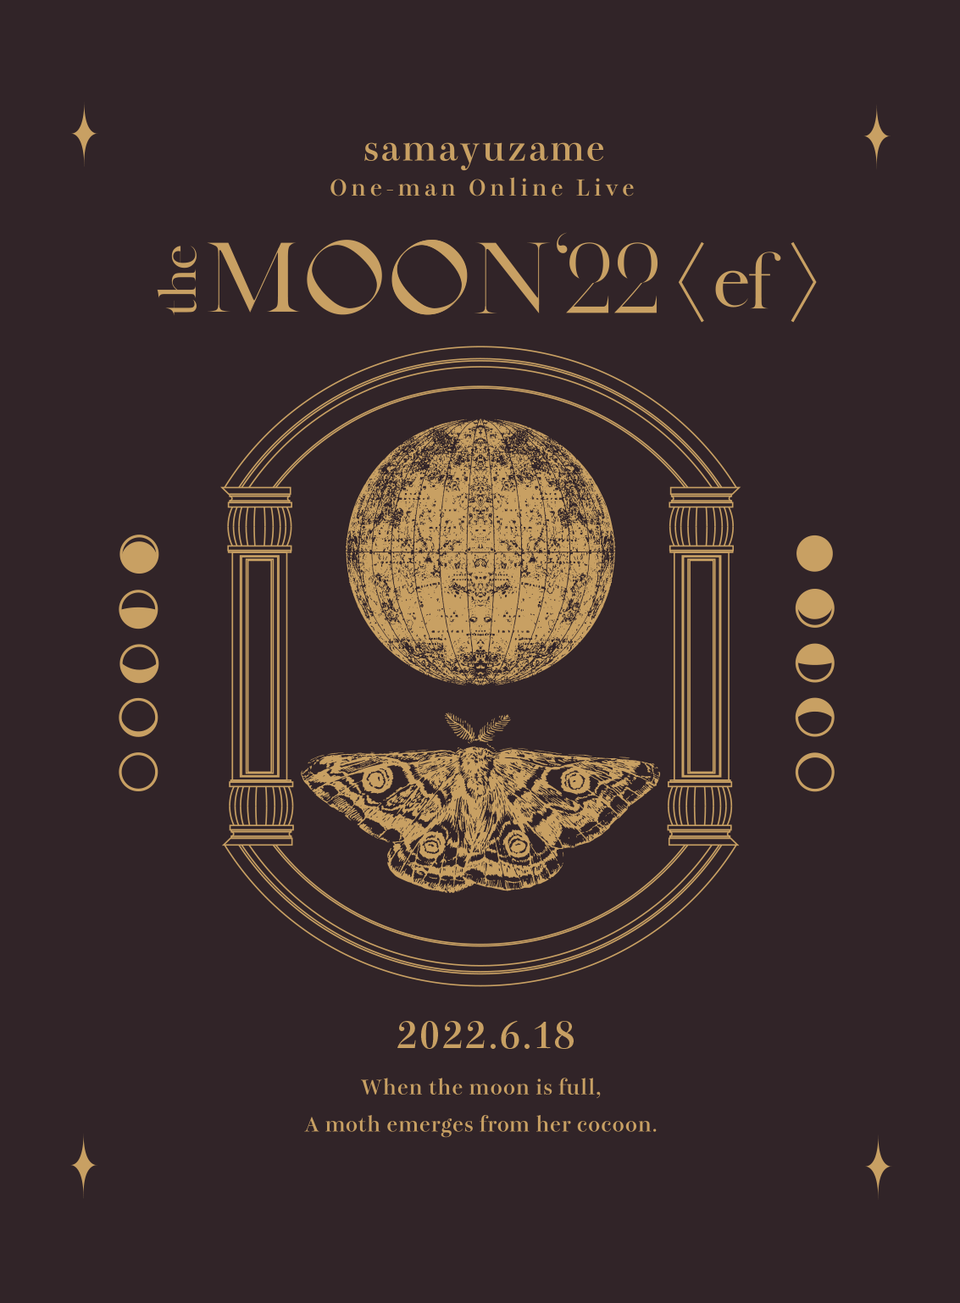 One-man Online Live “theMOON'22〈ef〉”